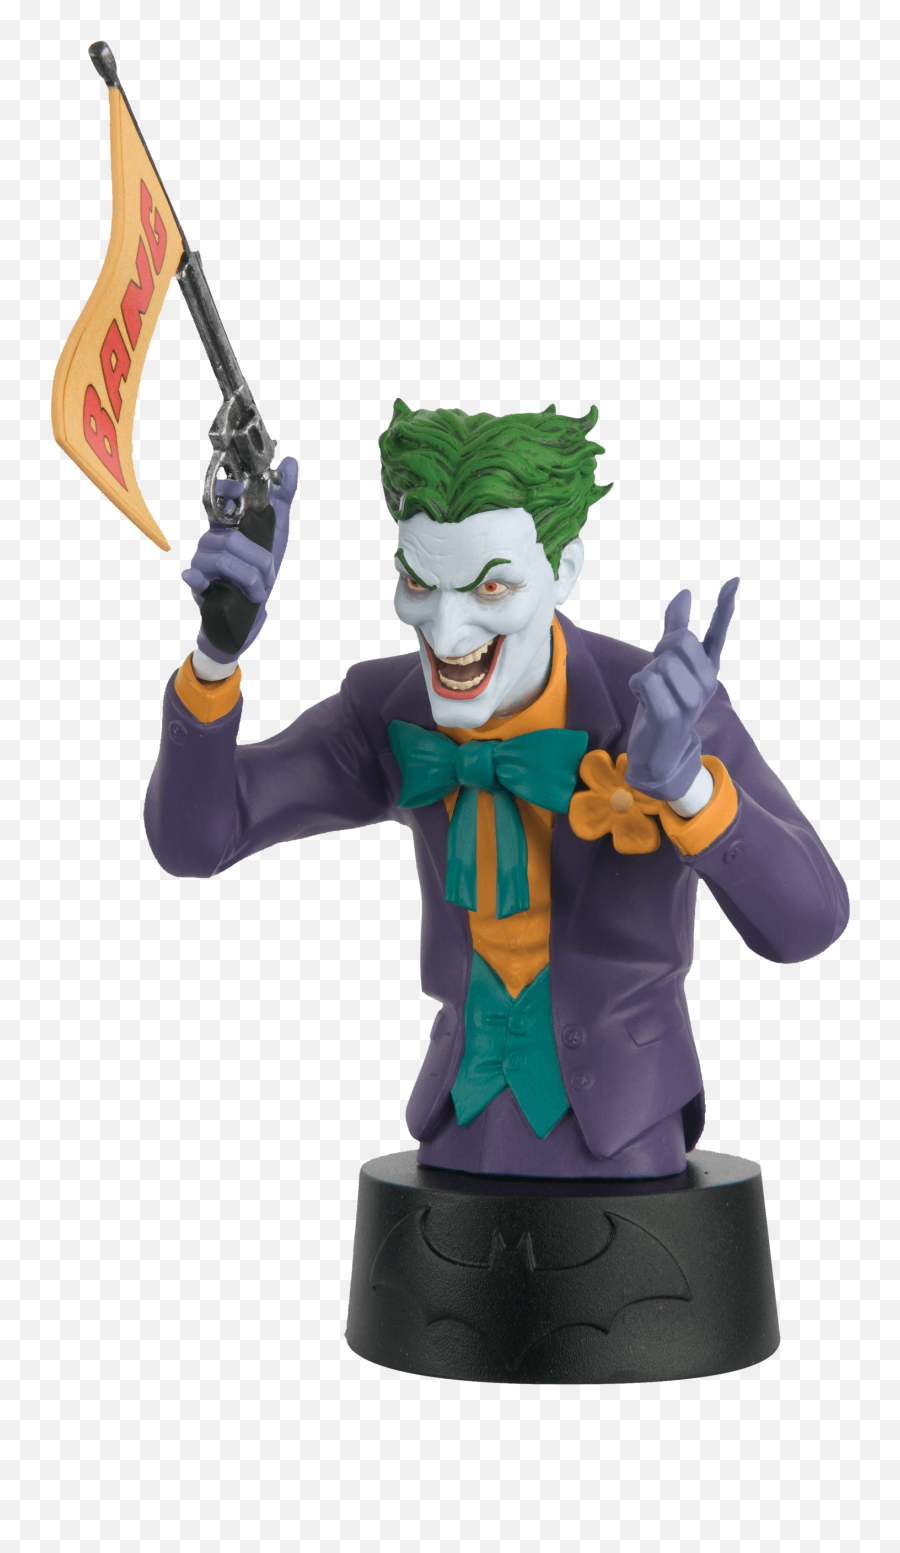 Eaglemoss Collections Archives Page 4 Of 4 Graphic Policy - Eaglemoss Dc Comics Batman The Joker Emoji,The Emoji Movie Collectible Figures